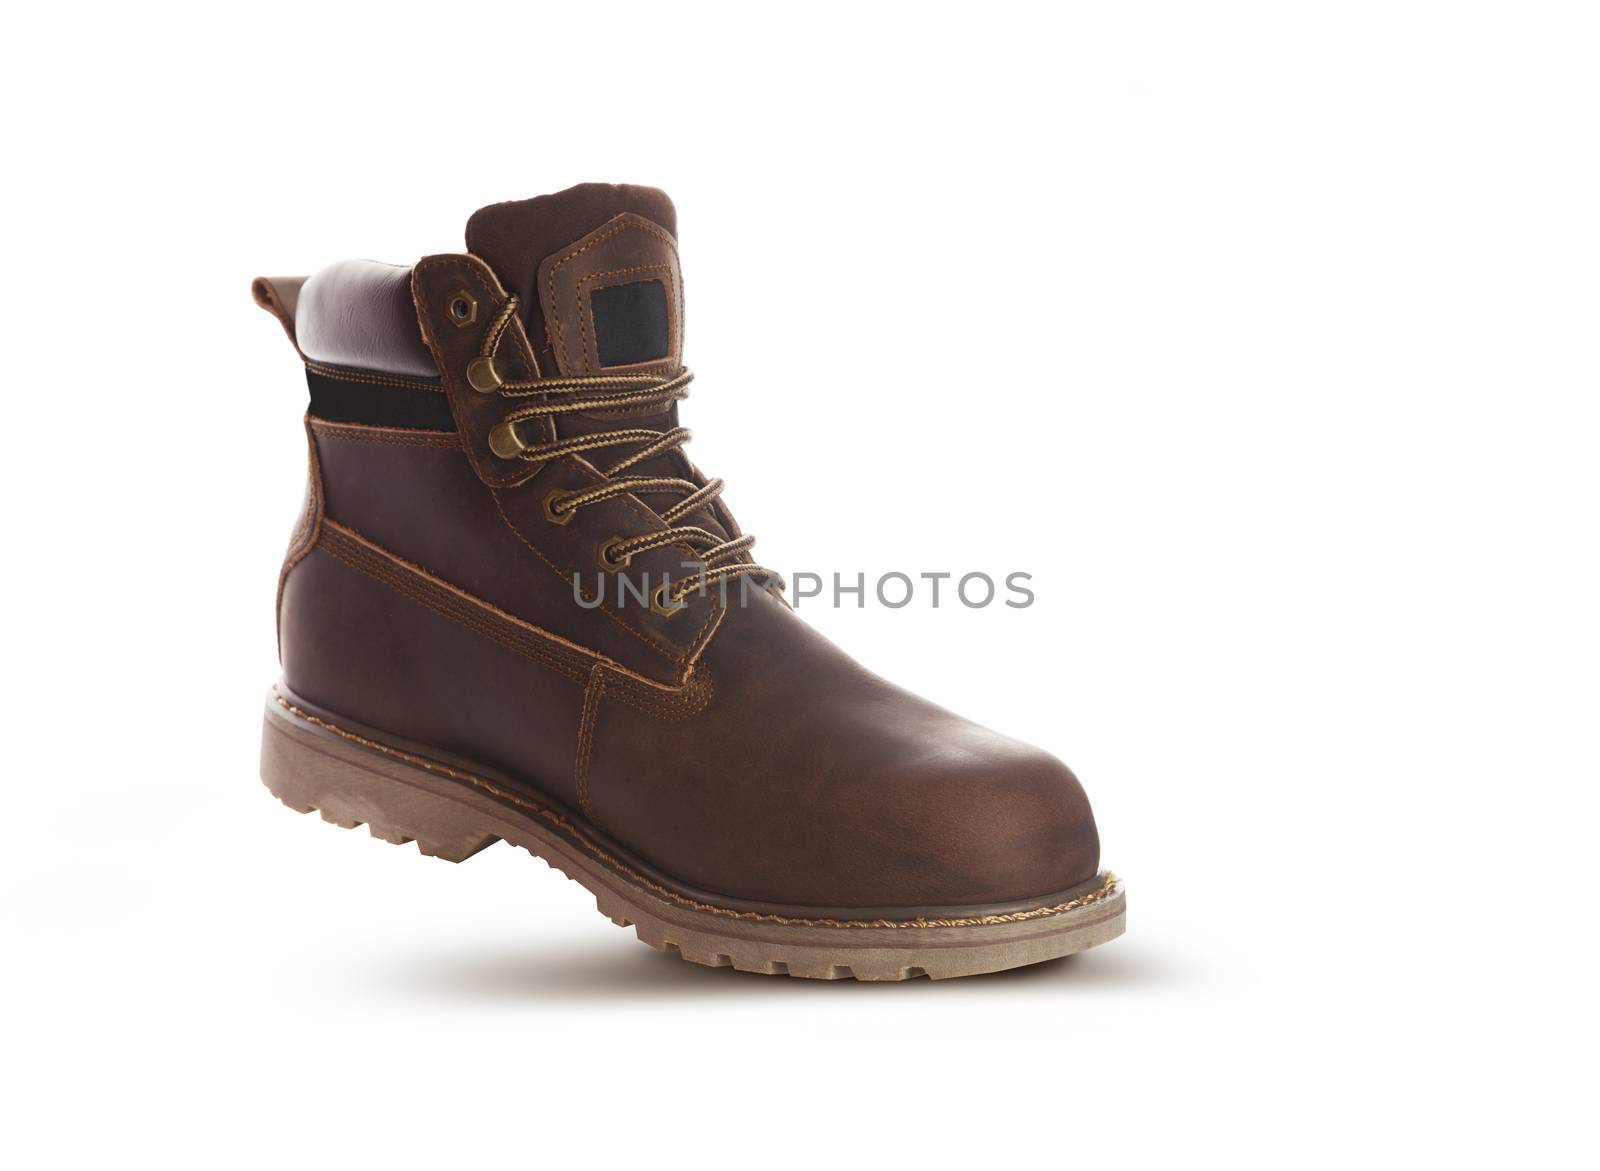 Man ankle boots, brown color, with nubuck leather. Isolated on white background, closed up